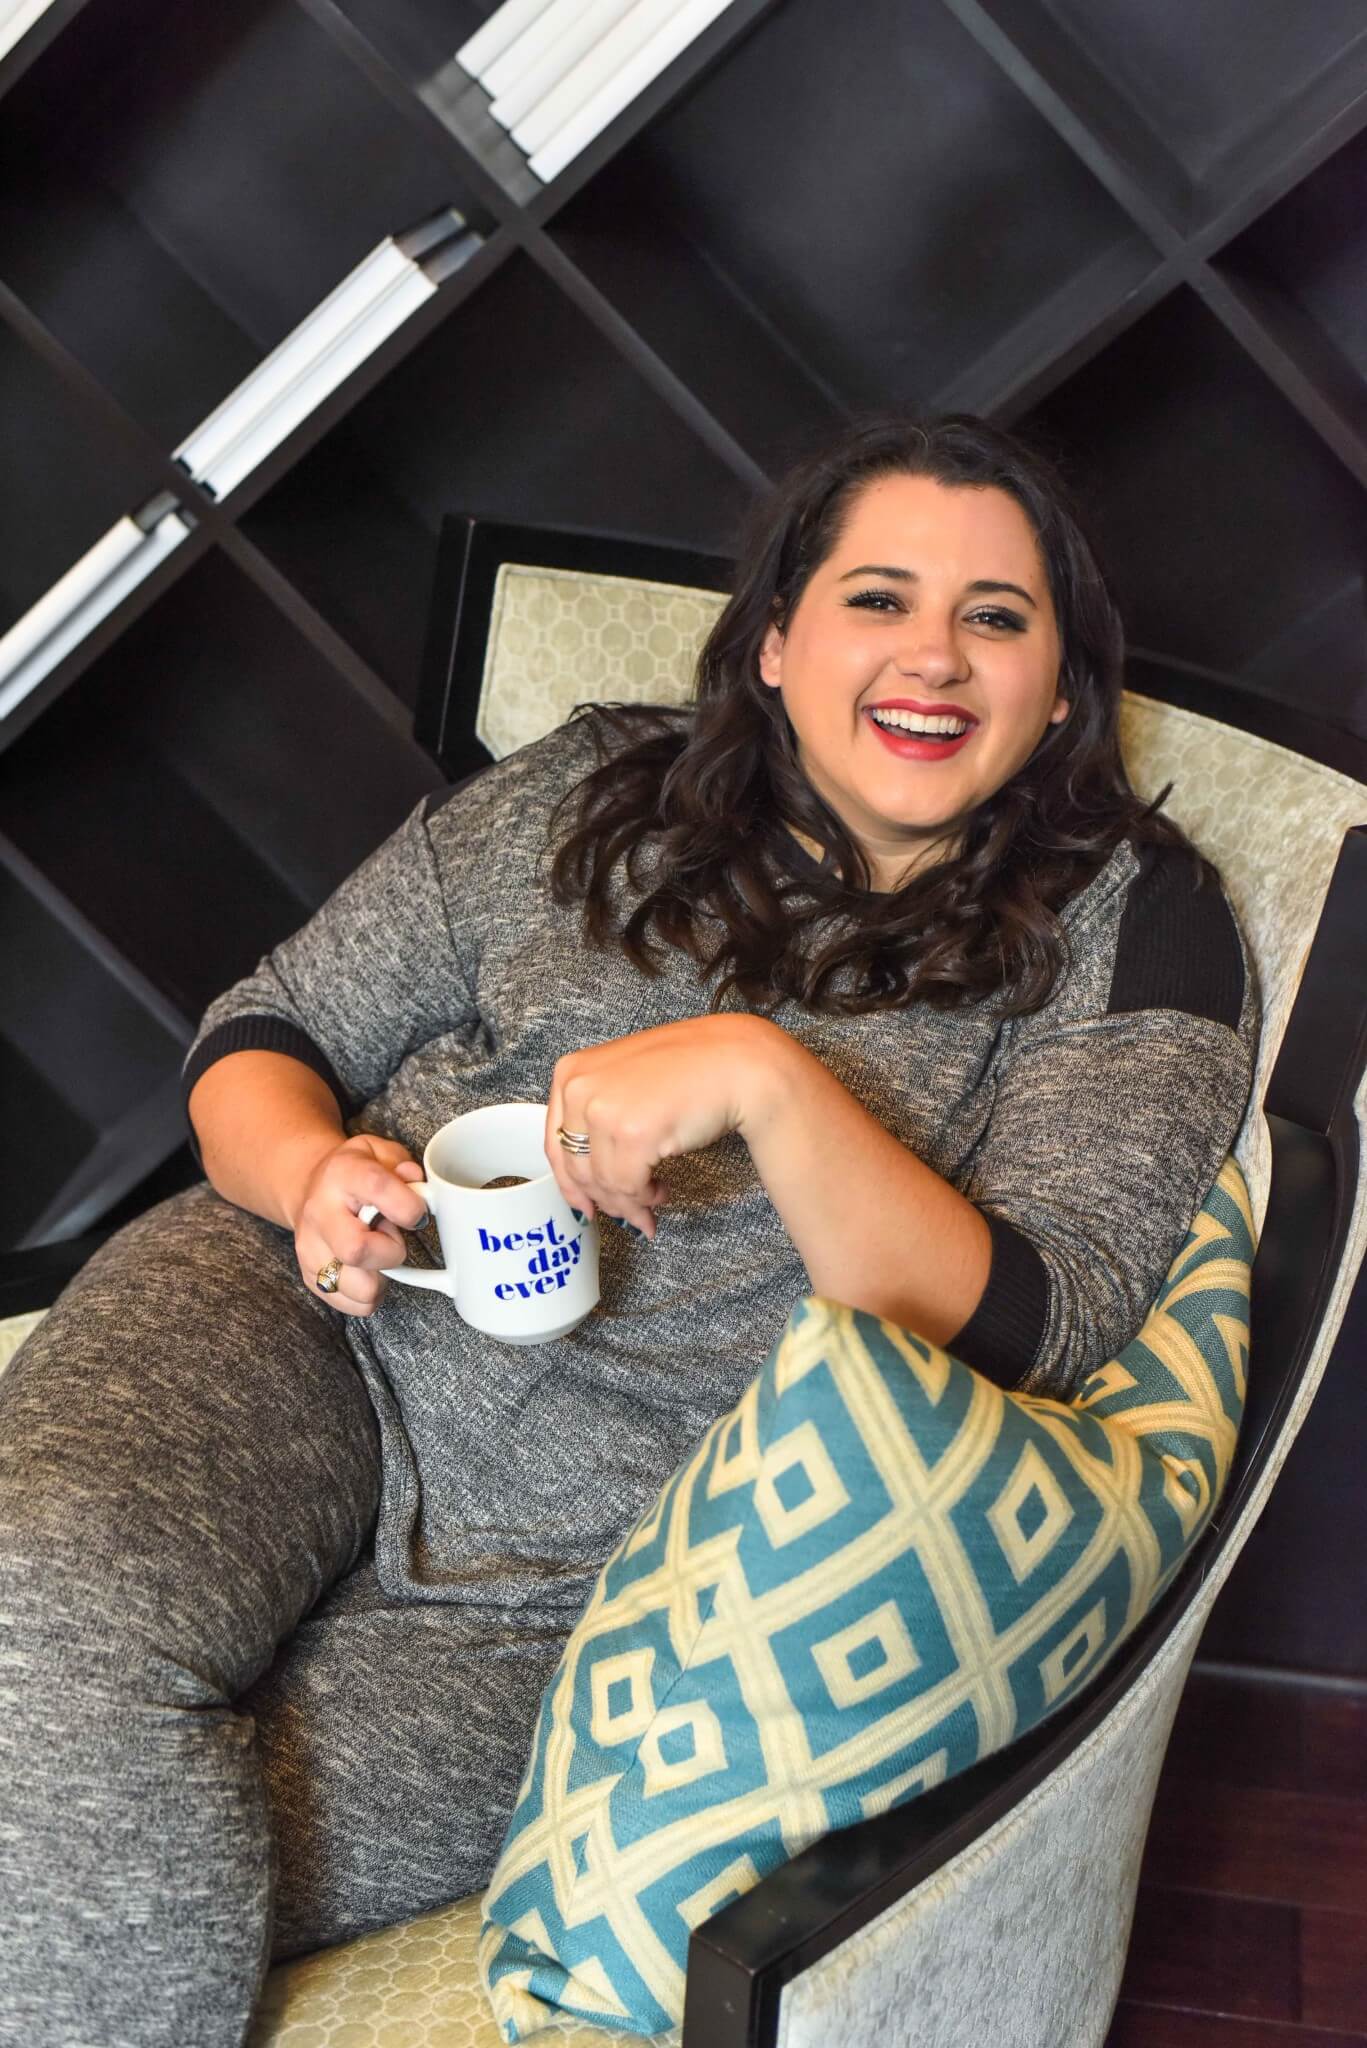 Looking for the perfect Thanksgiving Day pajama set? These grey plus size pajamas would be perfect for watching the Macy's Thanksgiving Day Parade. #thanksgivingstyle #thanksgiving #plussize